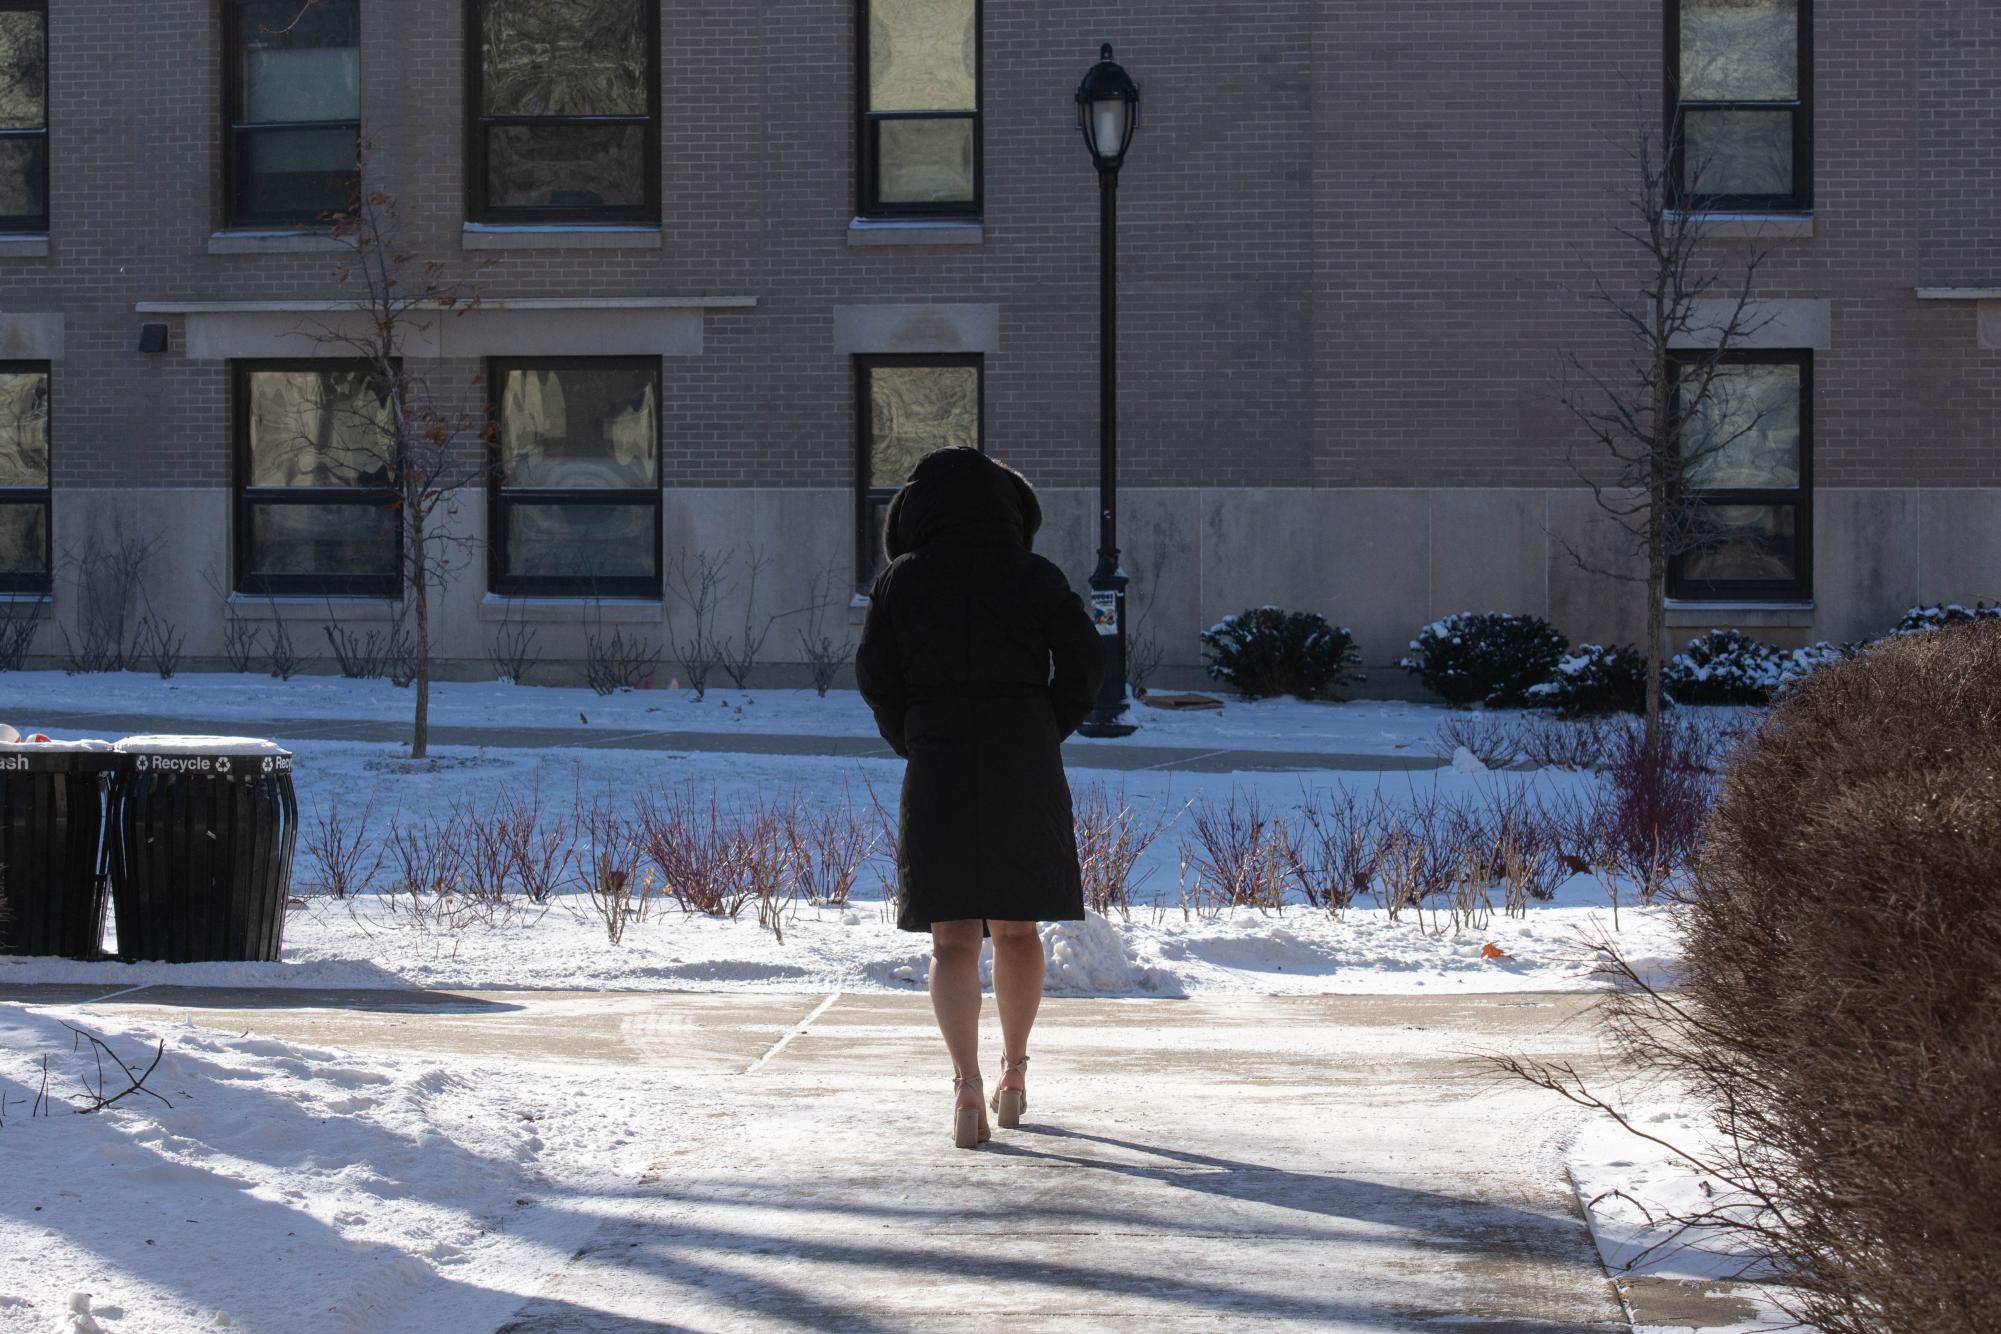  First-years transition to living in cold Evanston climate 